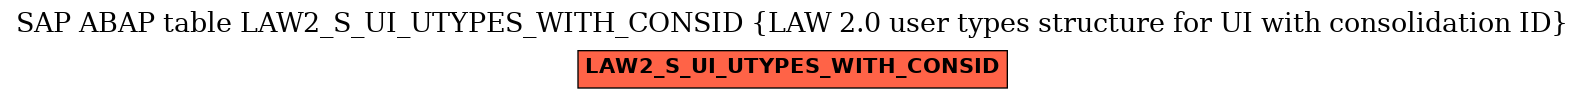 E-R Diagram for table LAW2_S_UI_UTYPES_WITH_CONSID (LAW 2.0 user types structure for UI with consolidation ID)